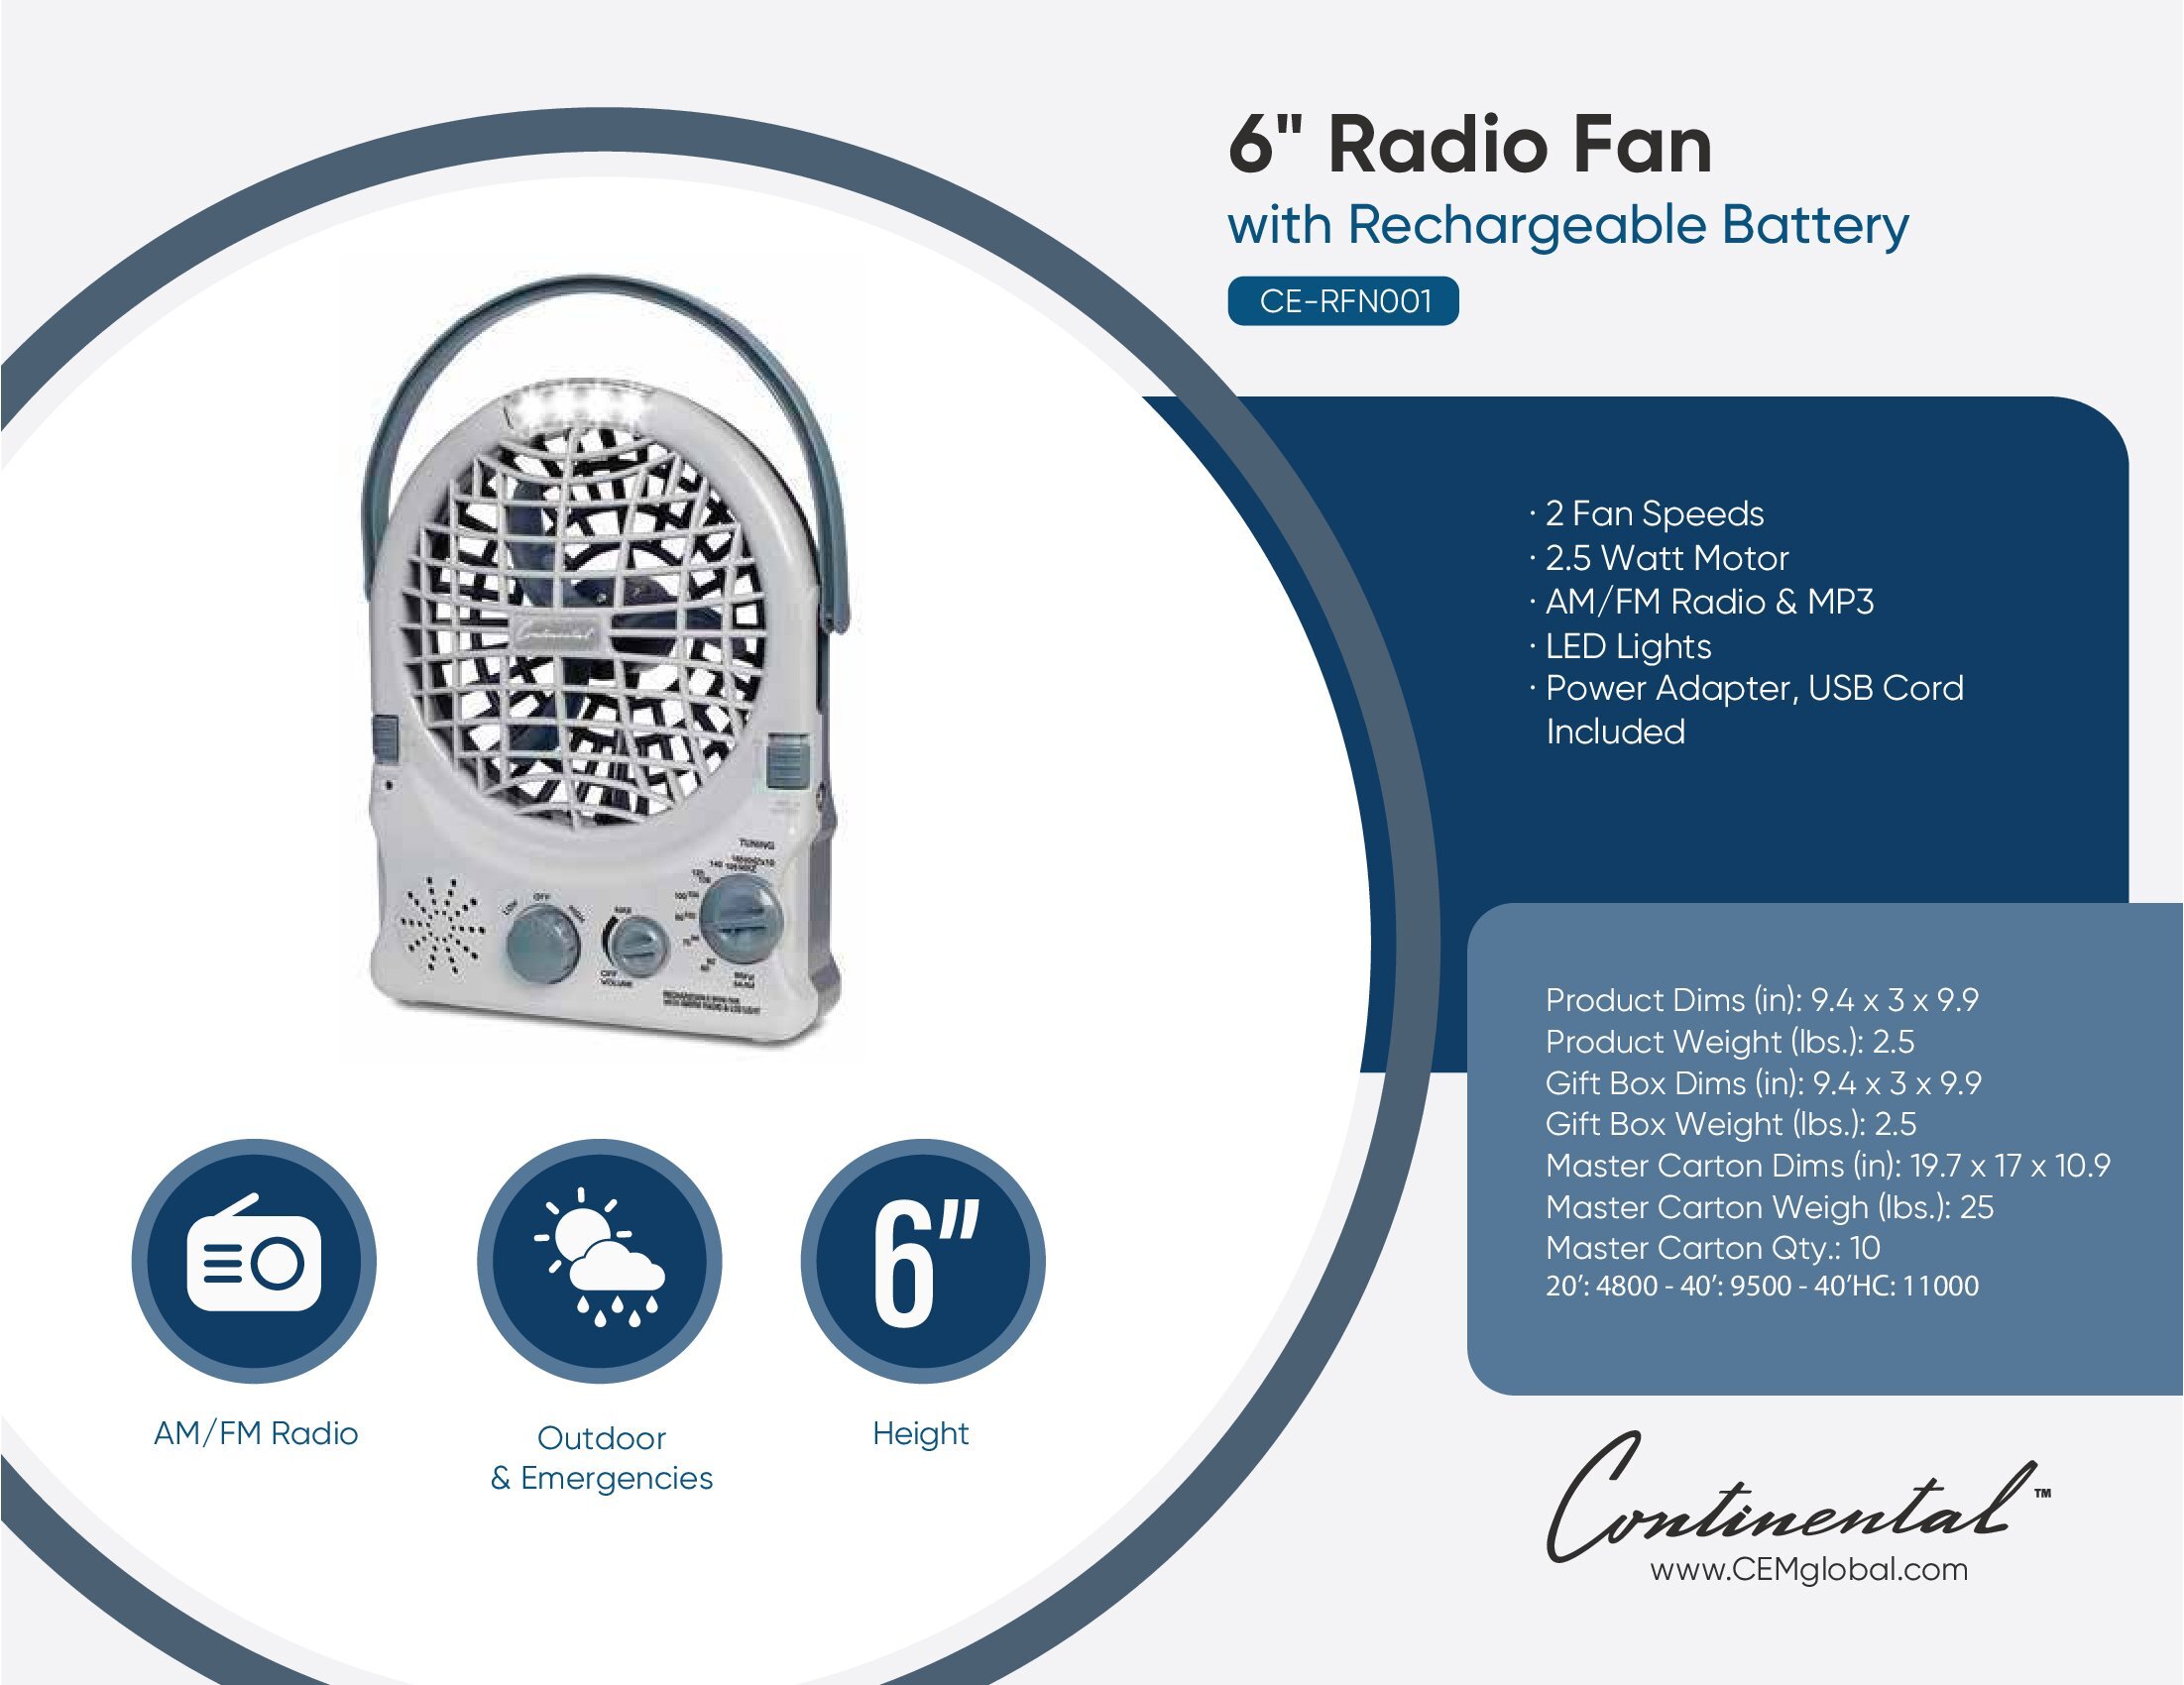 6" Radio Fan with Rechargeable Battery